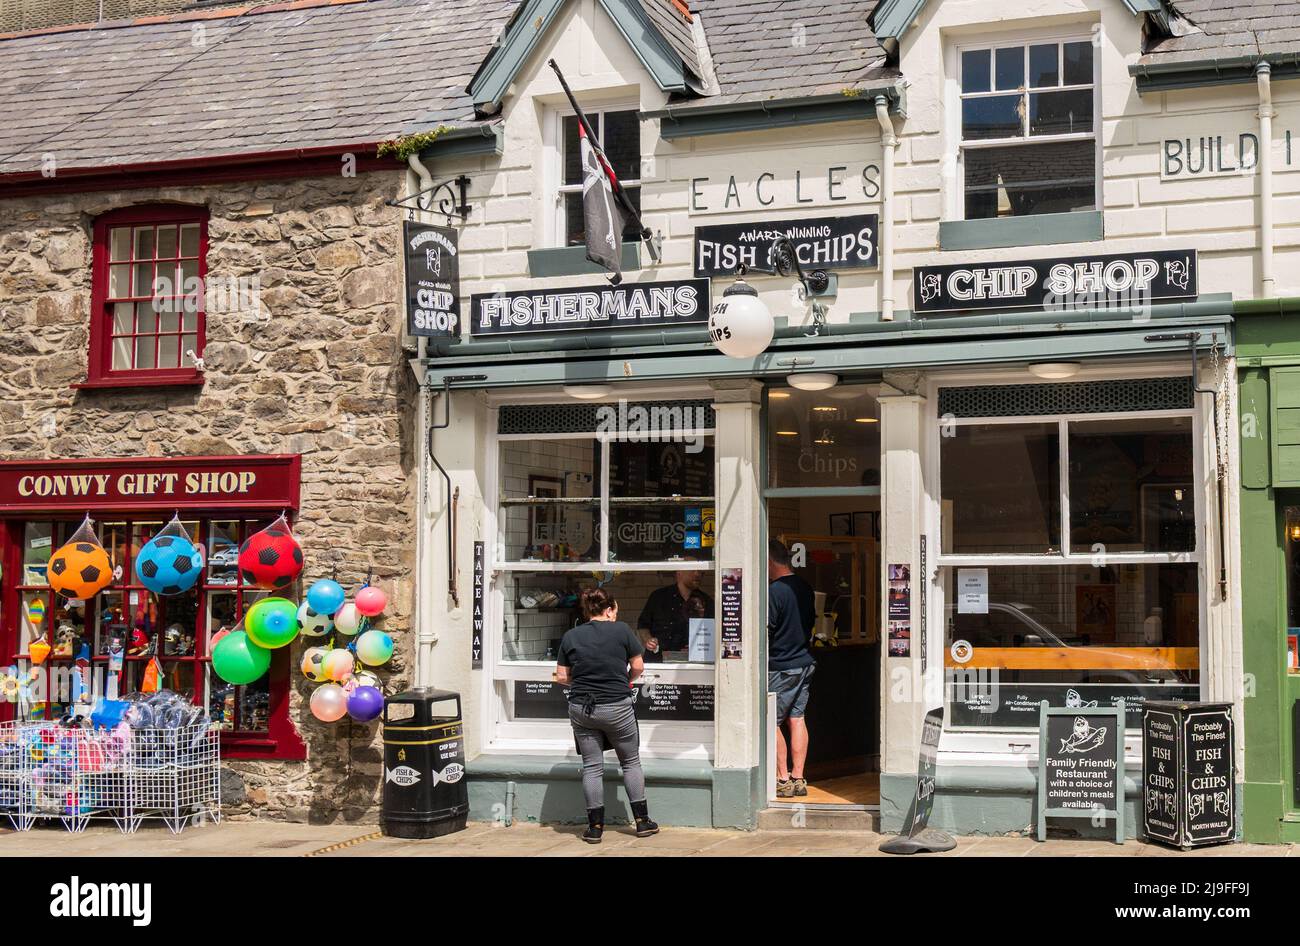 Fishermans Chip shop. A local fish and chip shop open in the coastal Welsh town of Conwy, wales. Stock Photo